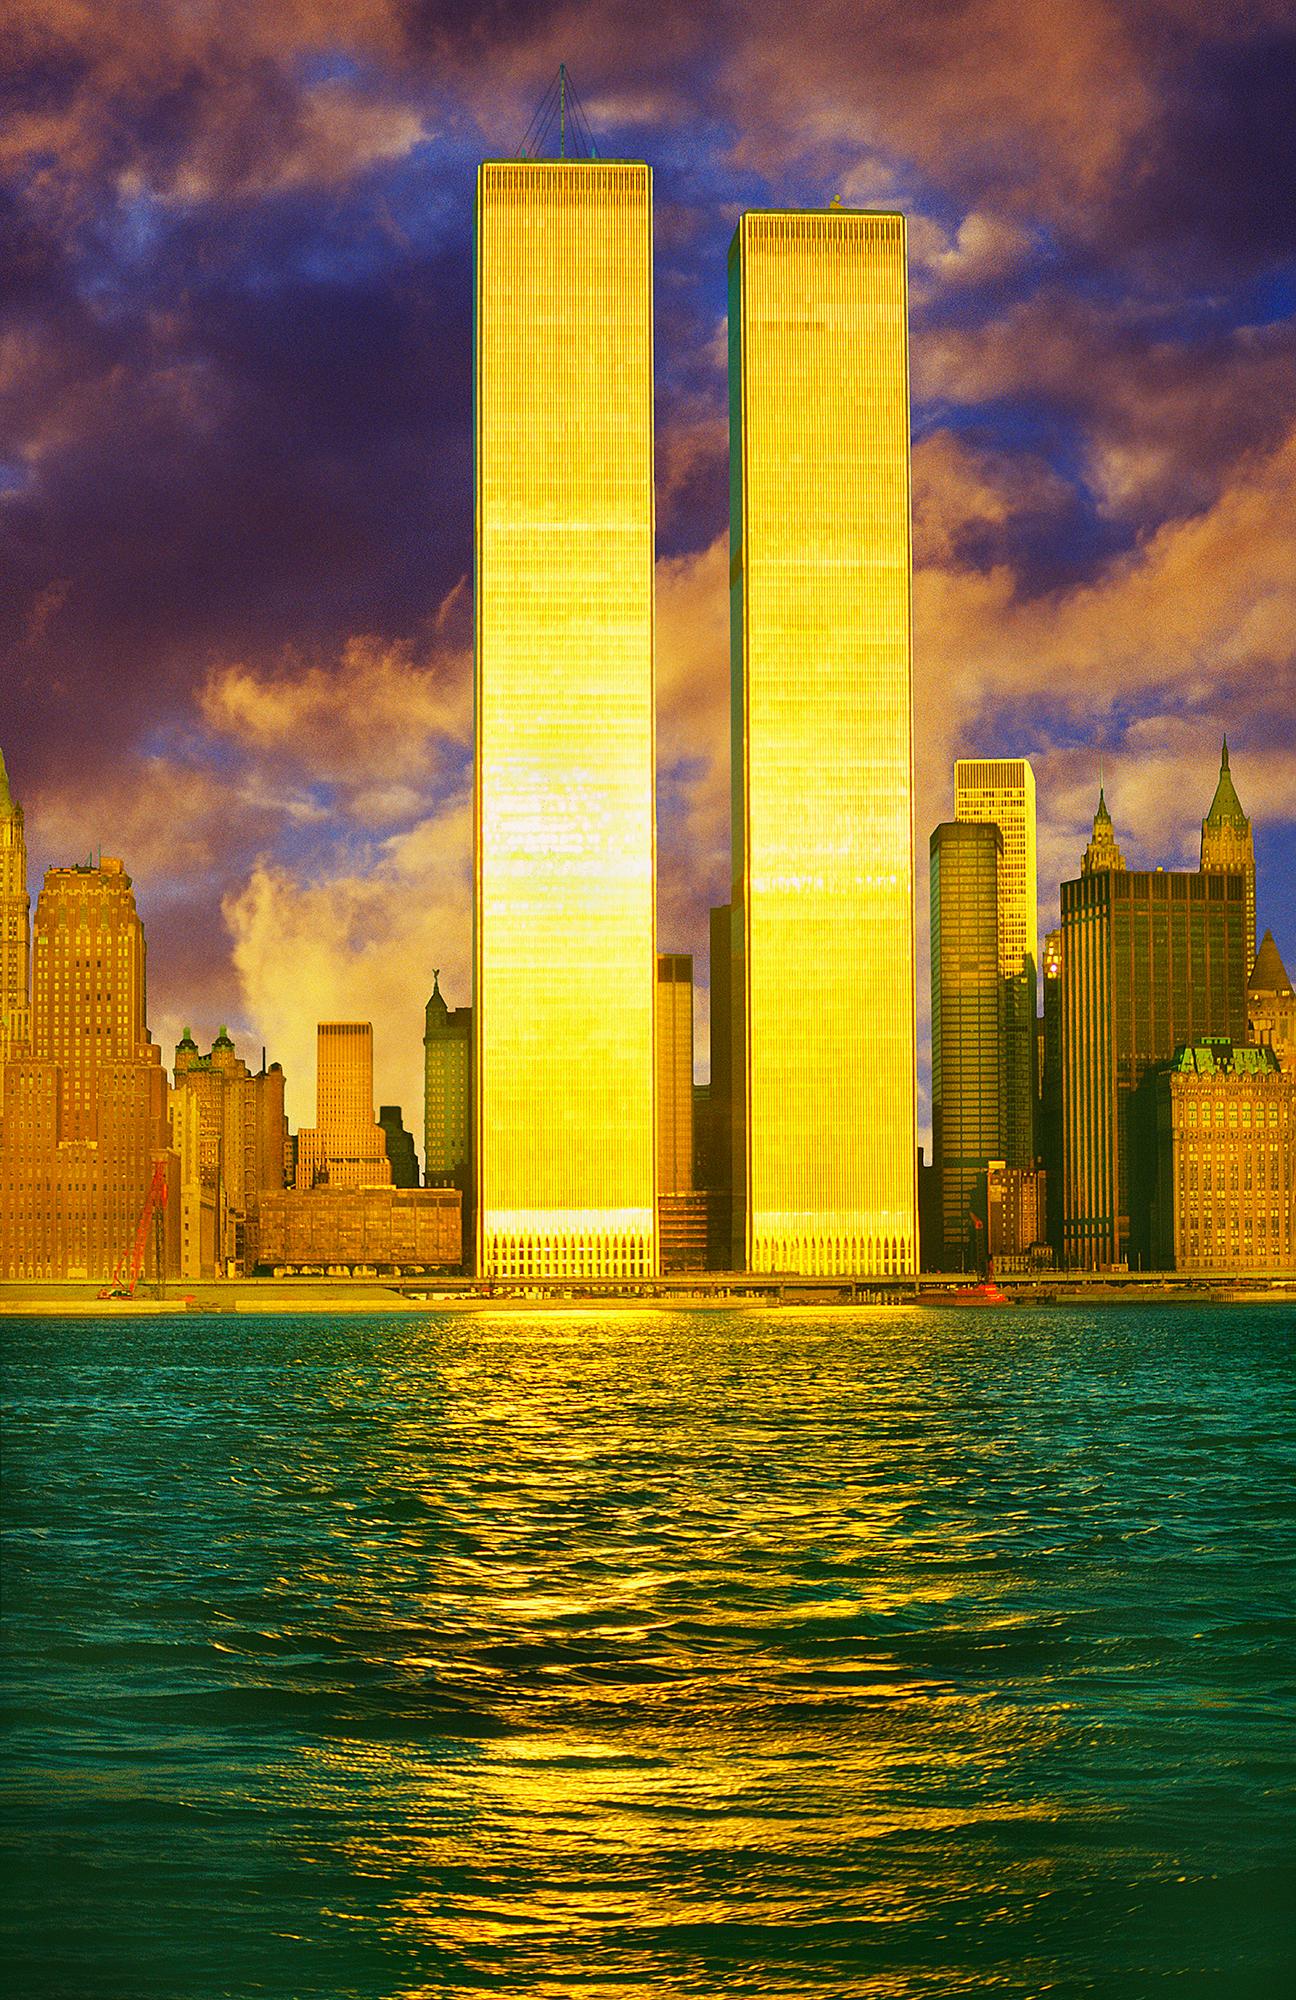 Twin Towers, World Trade Center, Lower Manhattan Bathed in Golden Light 